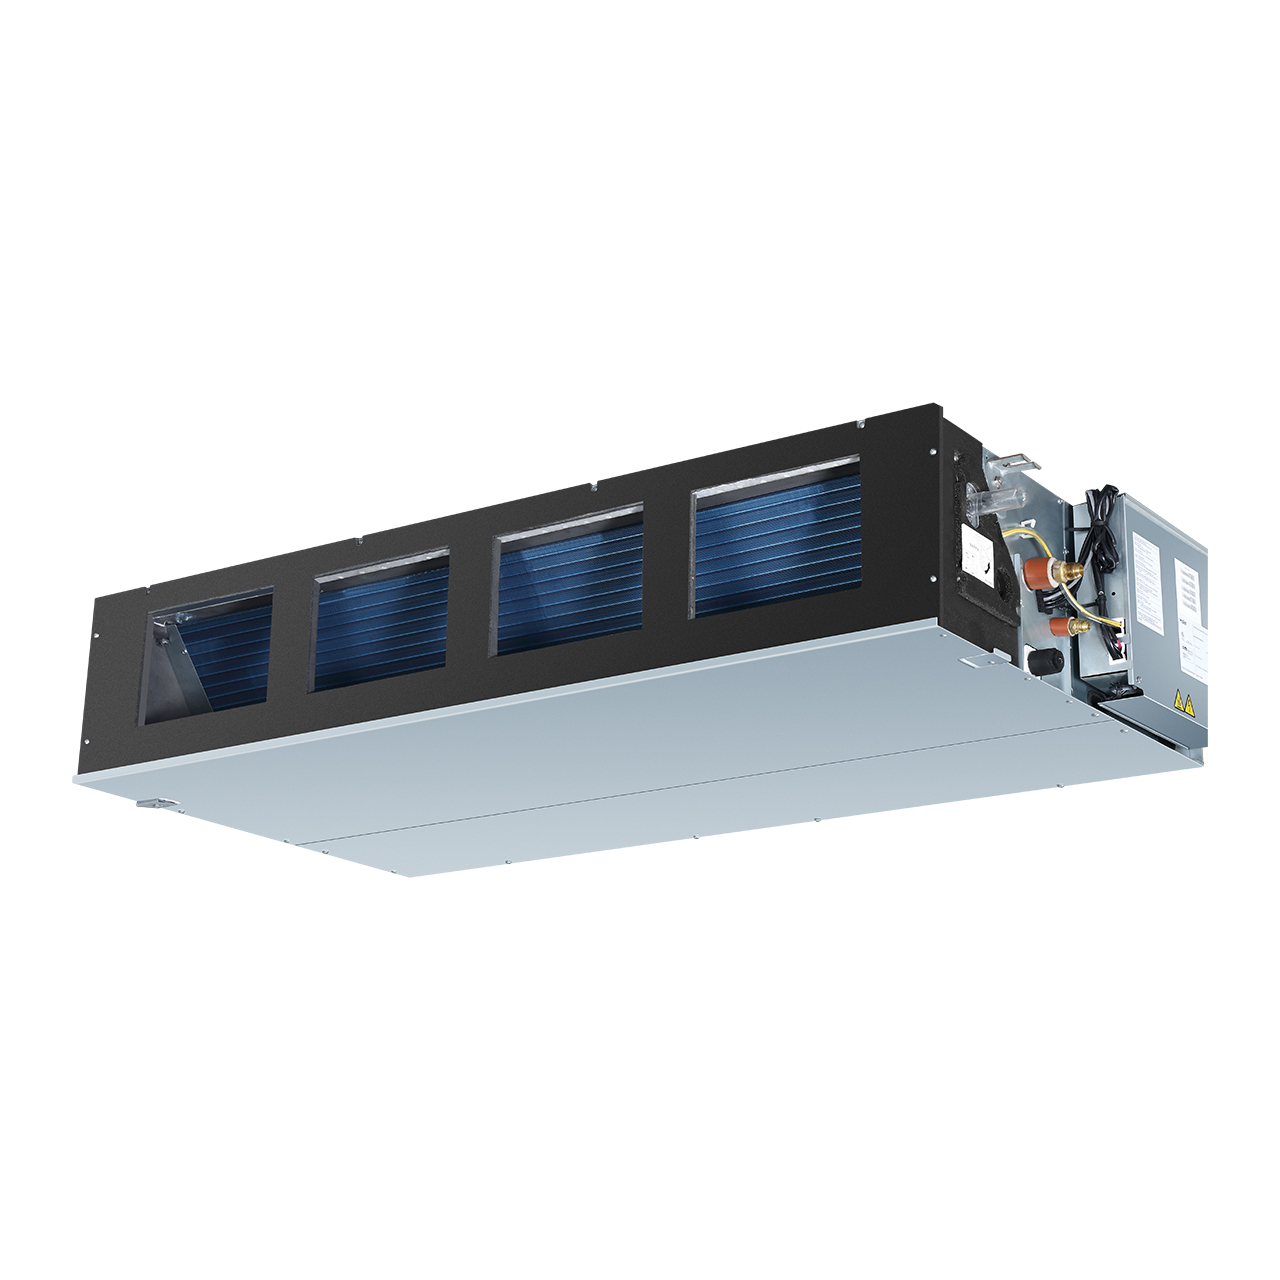 xct7-indoor-units-standard-static-duct-front-view